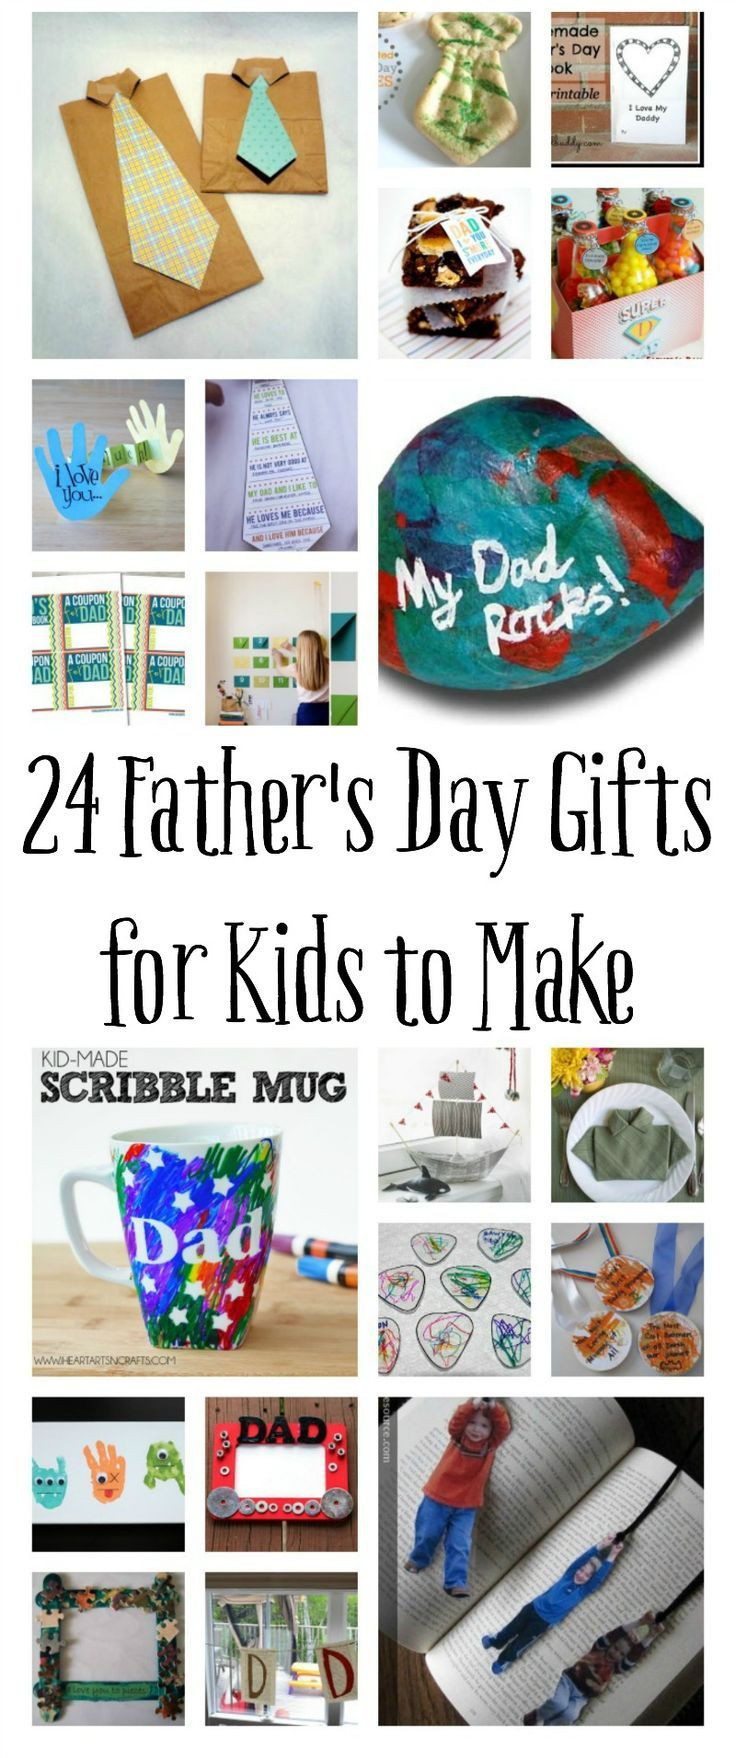 Father'S Day Gift Ideas From Child
 100 Homemade Father s Day Gifts for Kids to Make